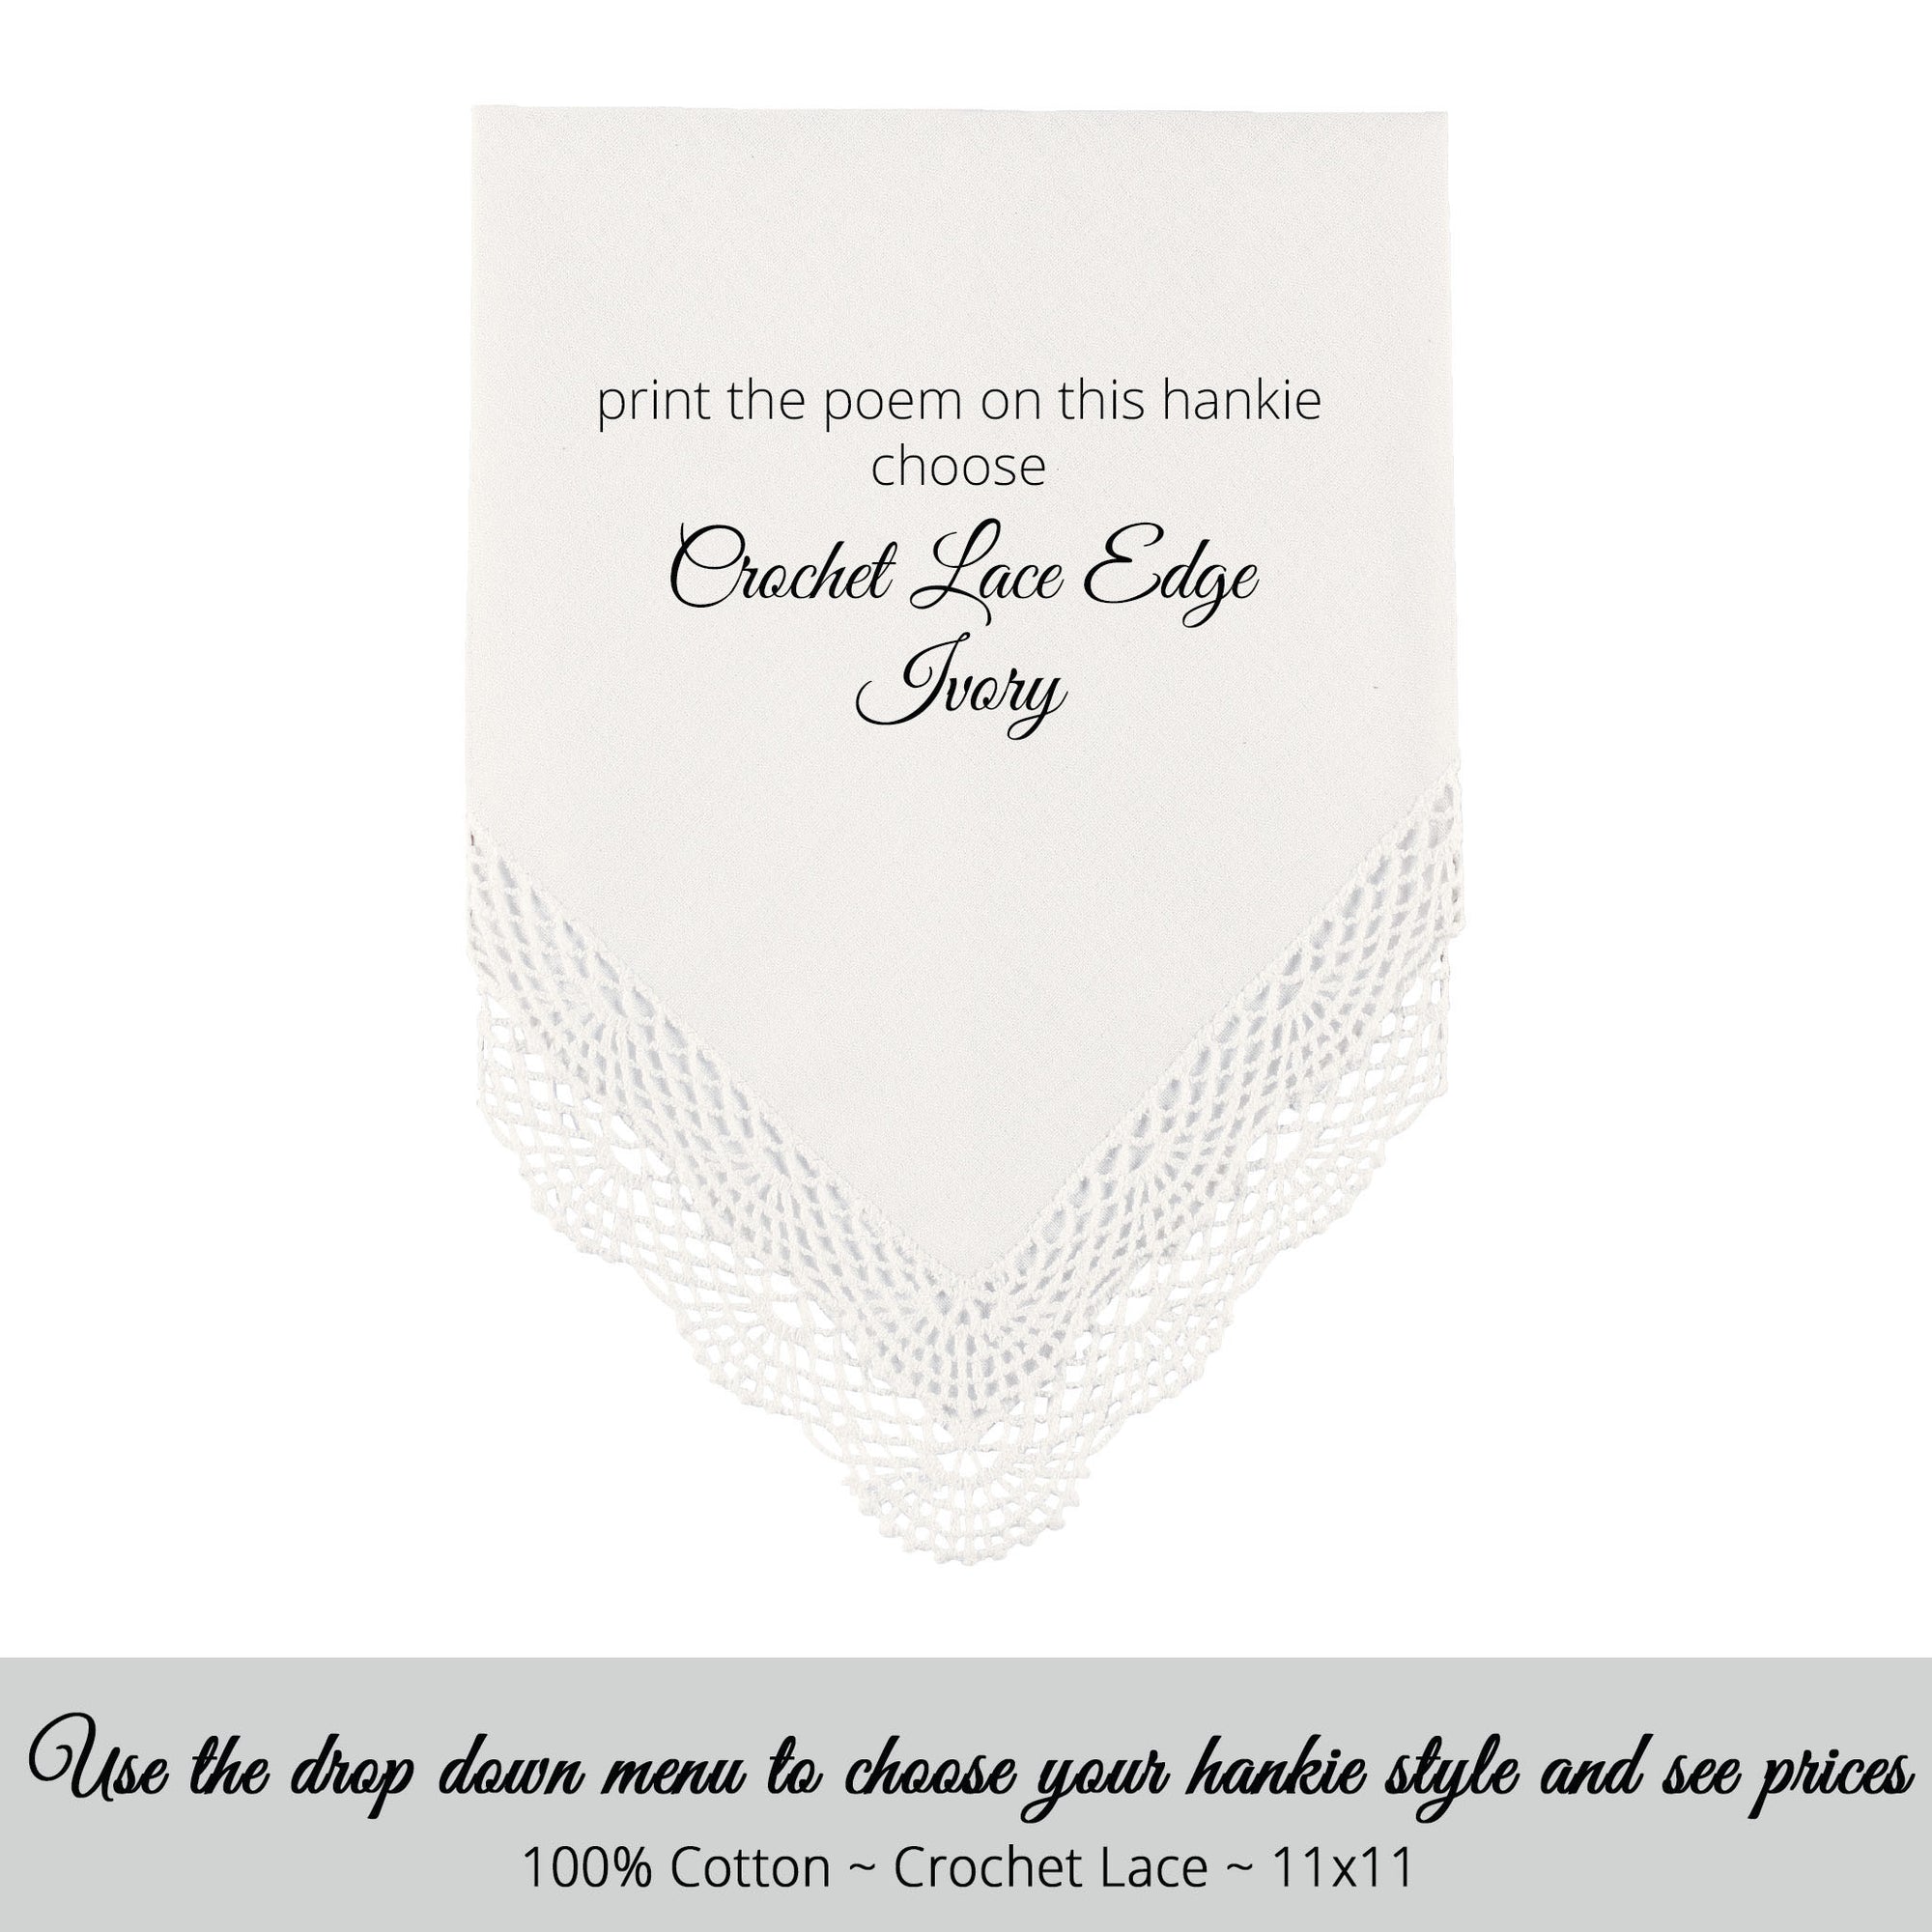 Wedding handkerchief ivory with crochet lace edge for personalized hankie